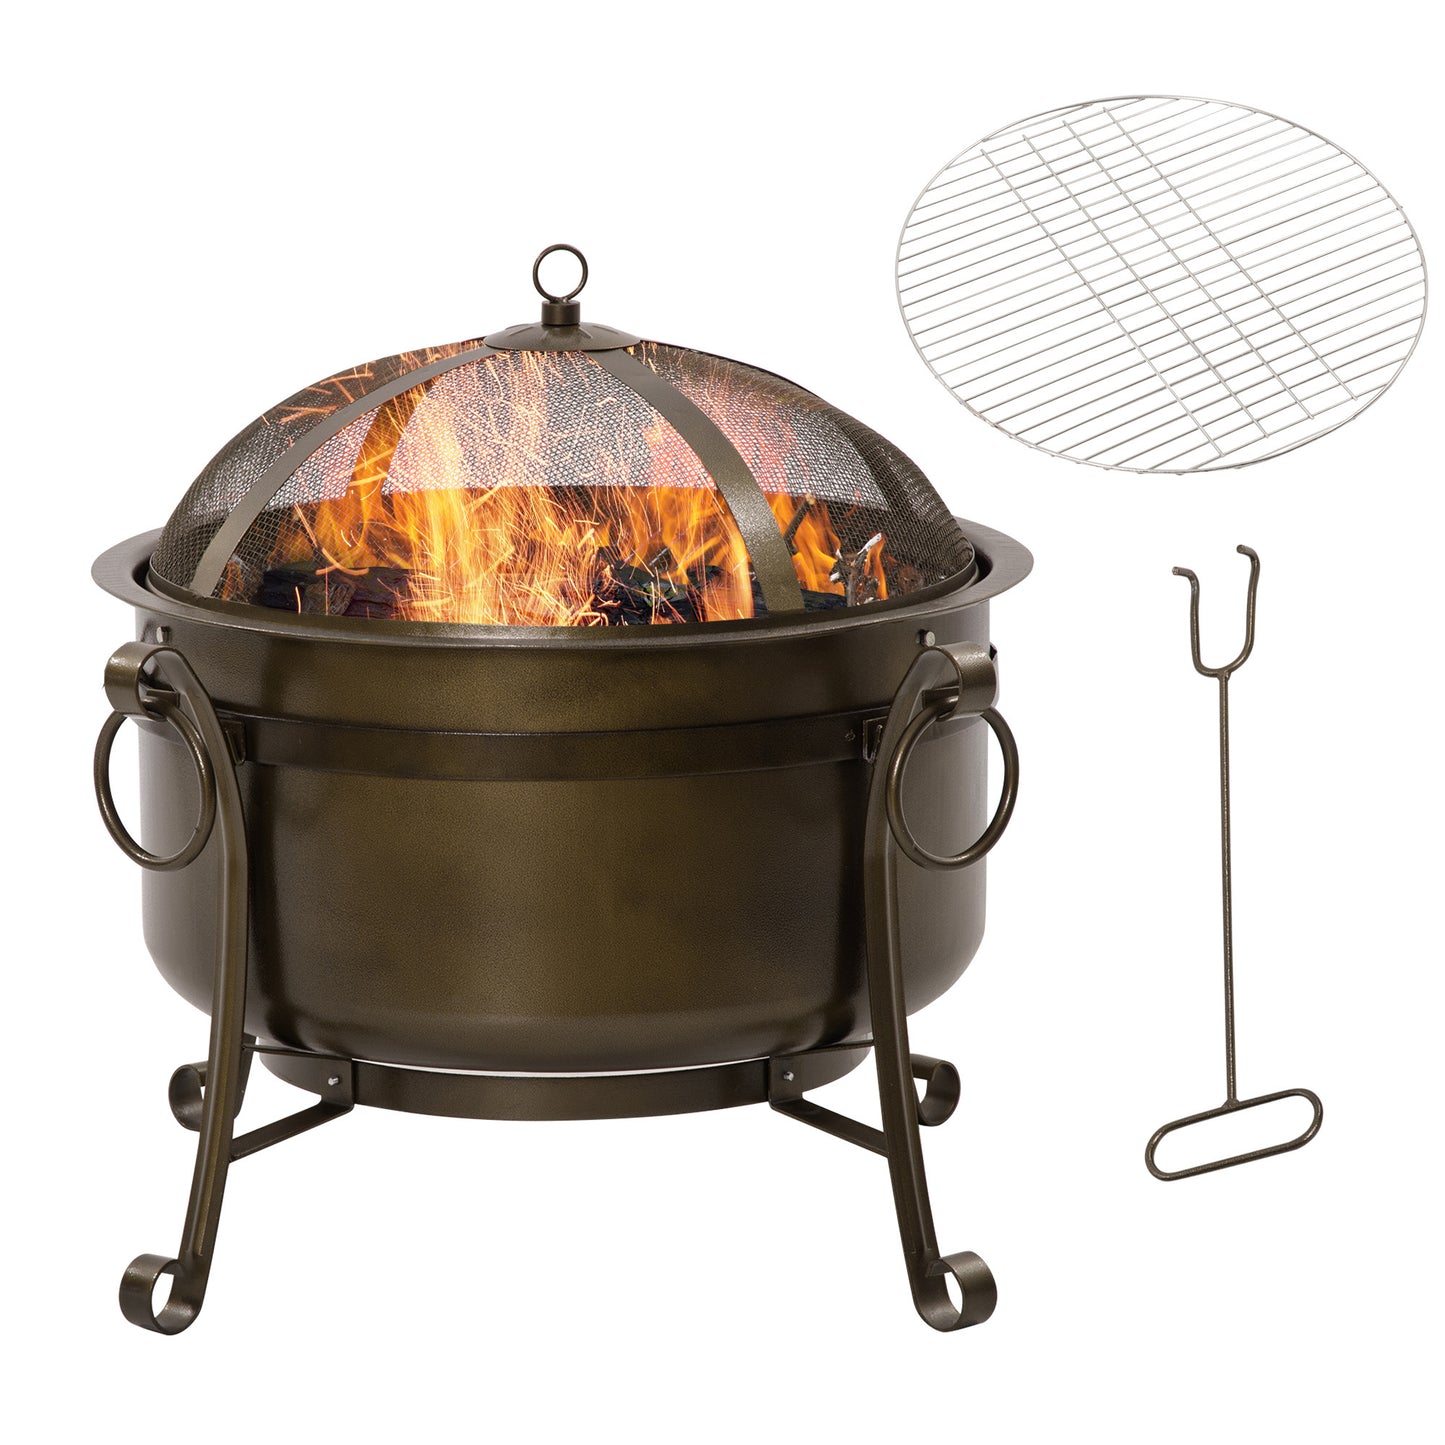 Outsunny 30 Portable Outdoor Fire Pit Grill, Wood Burning Bowl with Cooking Grate and Spark Screen Lid